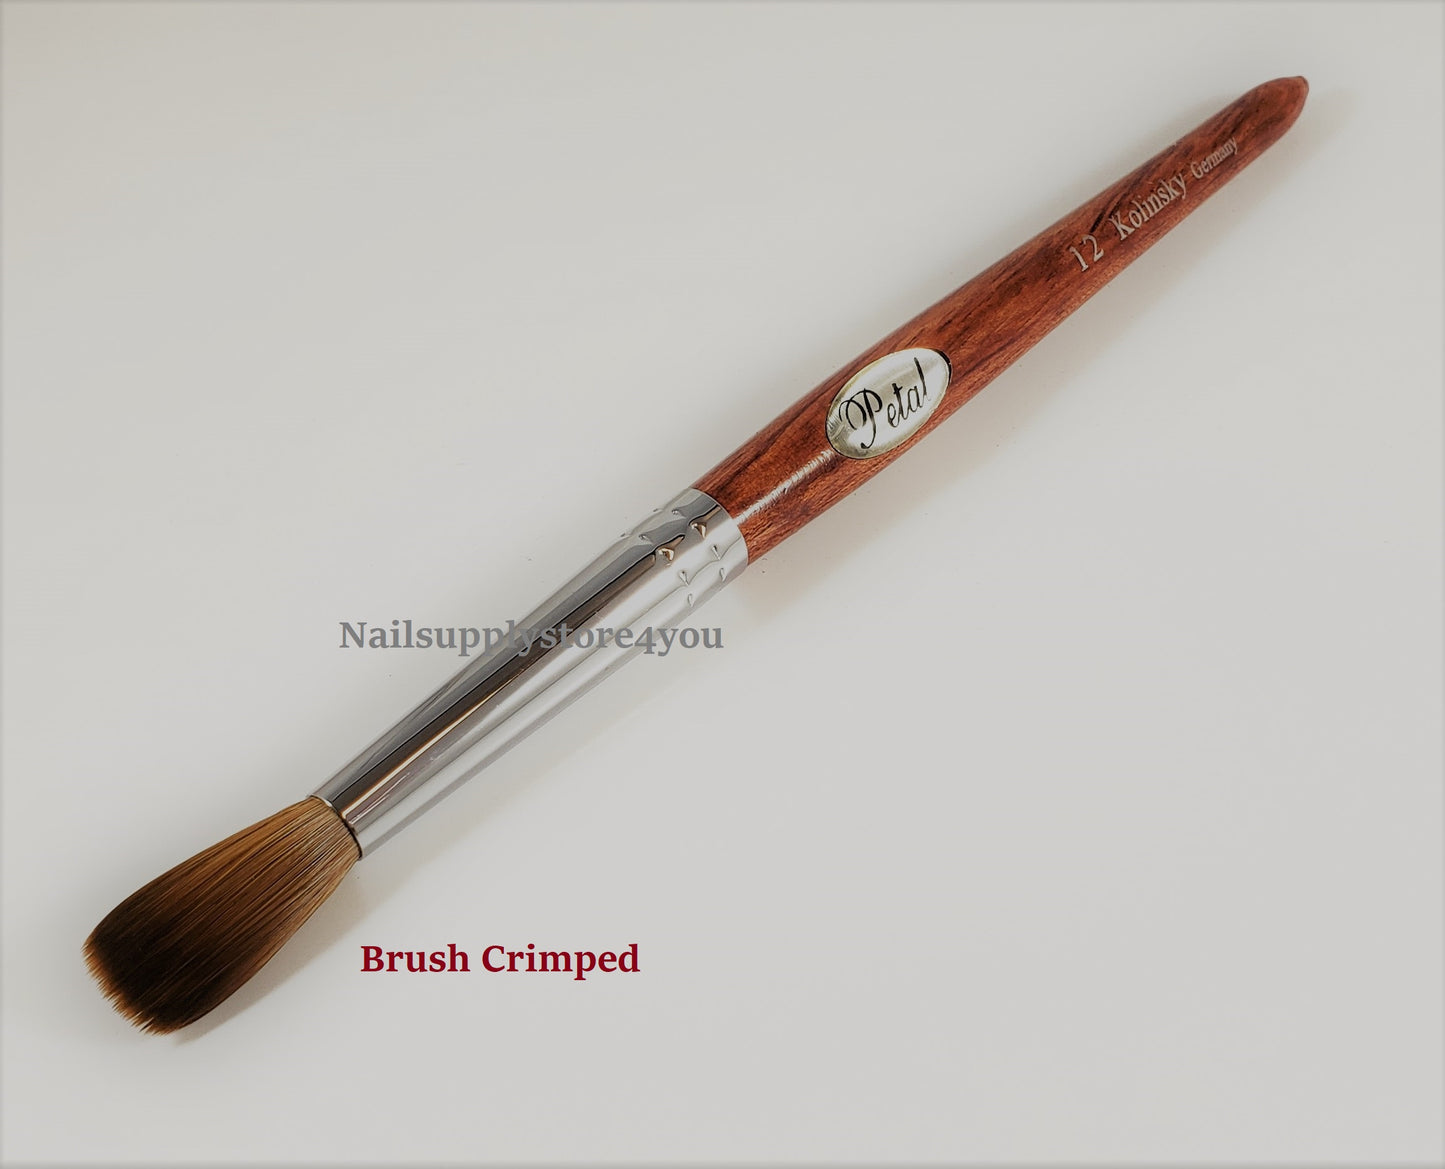 Nail Brush - Petal Red Wood Handle For Acrylic Nail Manicure Pedicure Powder  (CRIMPED)